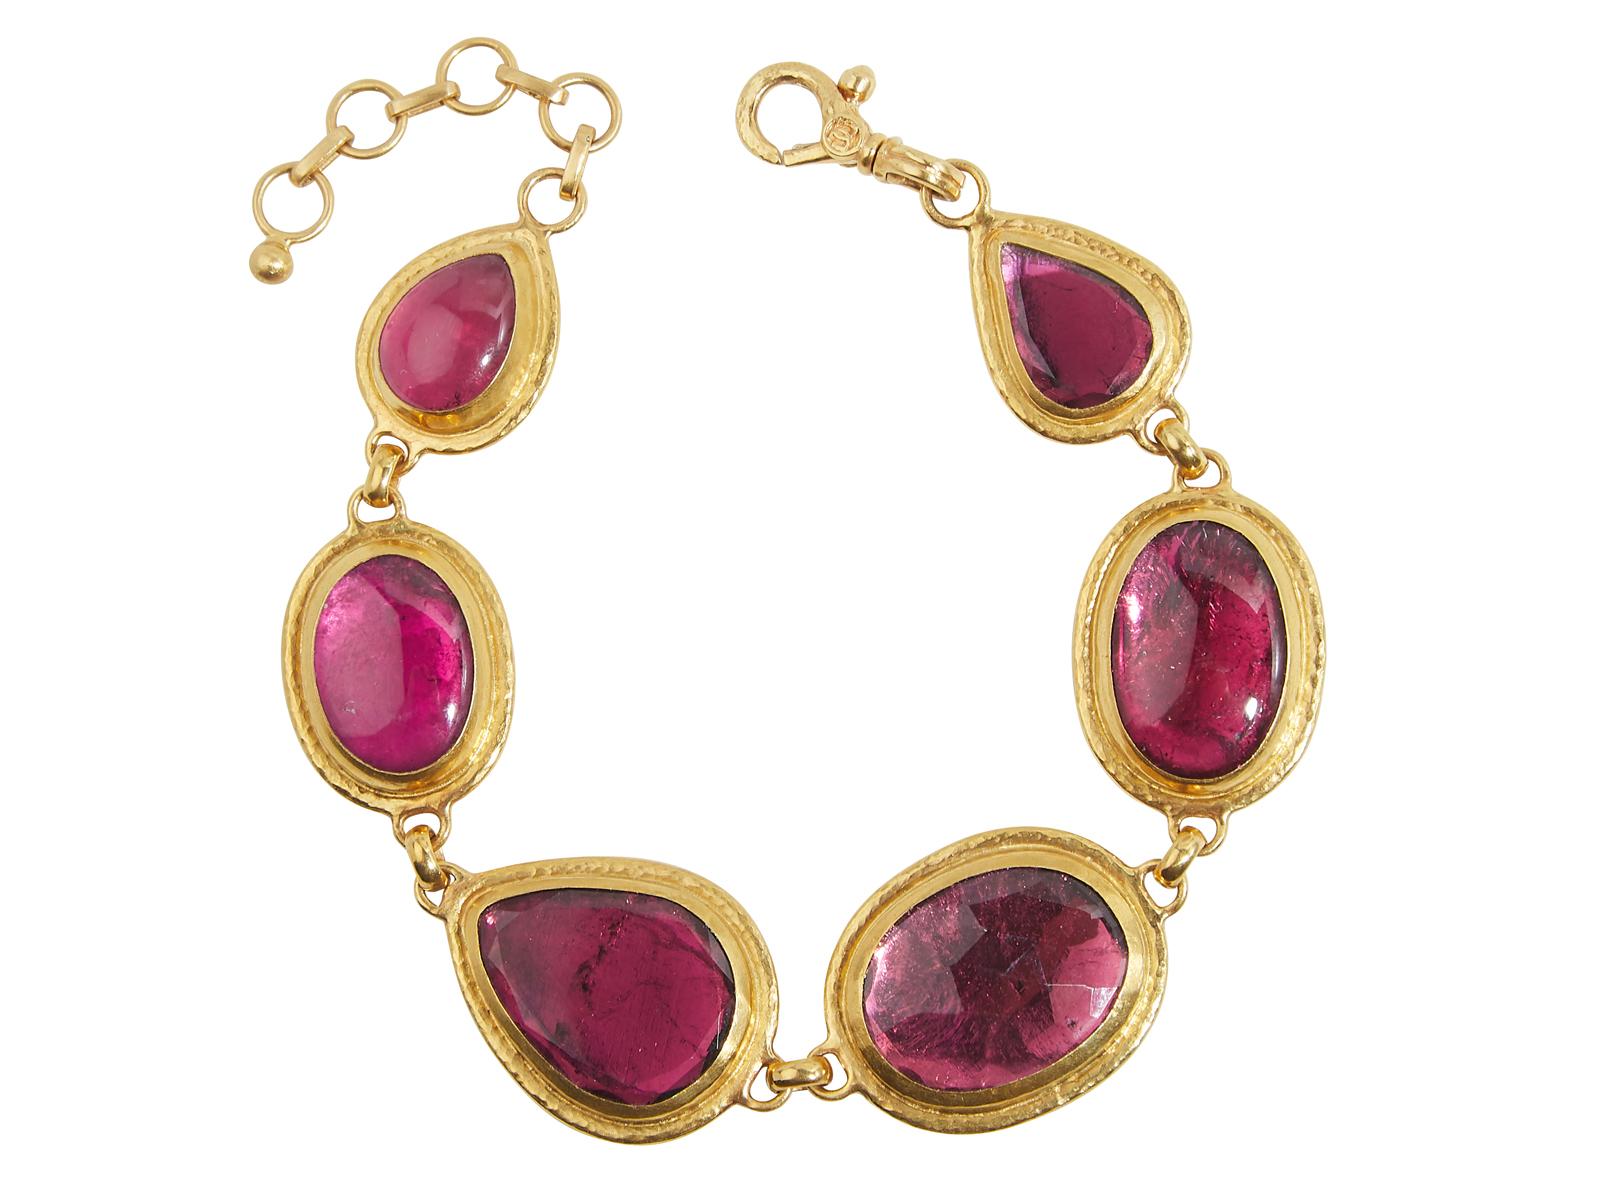 One-of-a-Kind Gold All Around Bracelet, from the Elements Collection, Pink Rosecut Tourmaline

“The unique quality of stones inspires my one of a kind creations. When I select a stone I usually have a vision of how I will build a design around it...